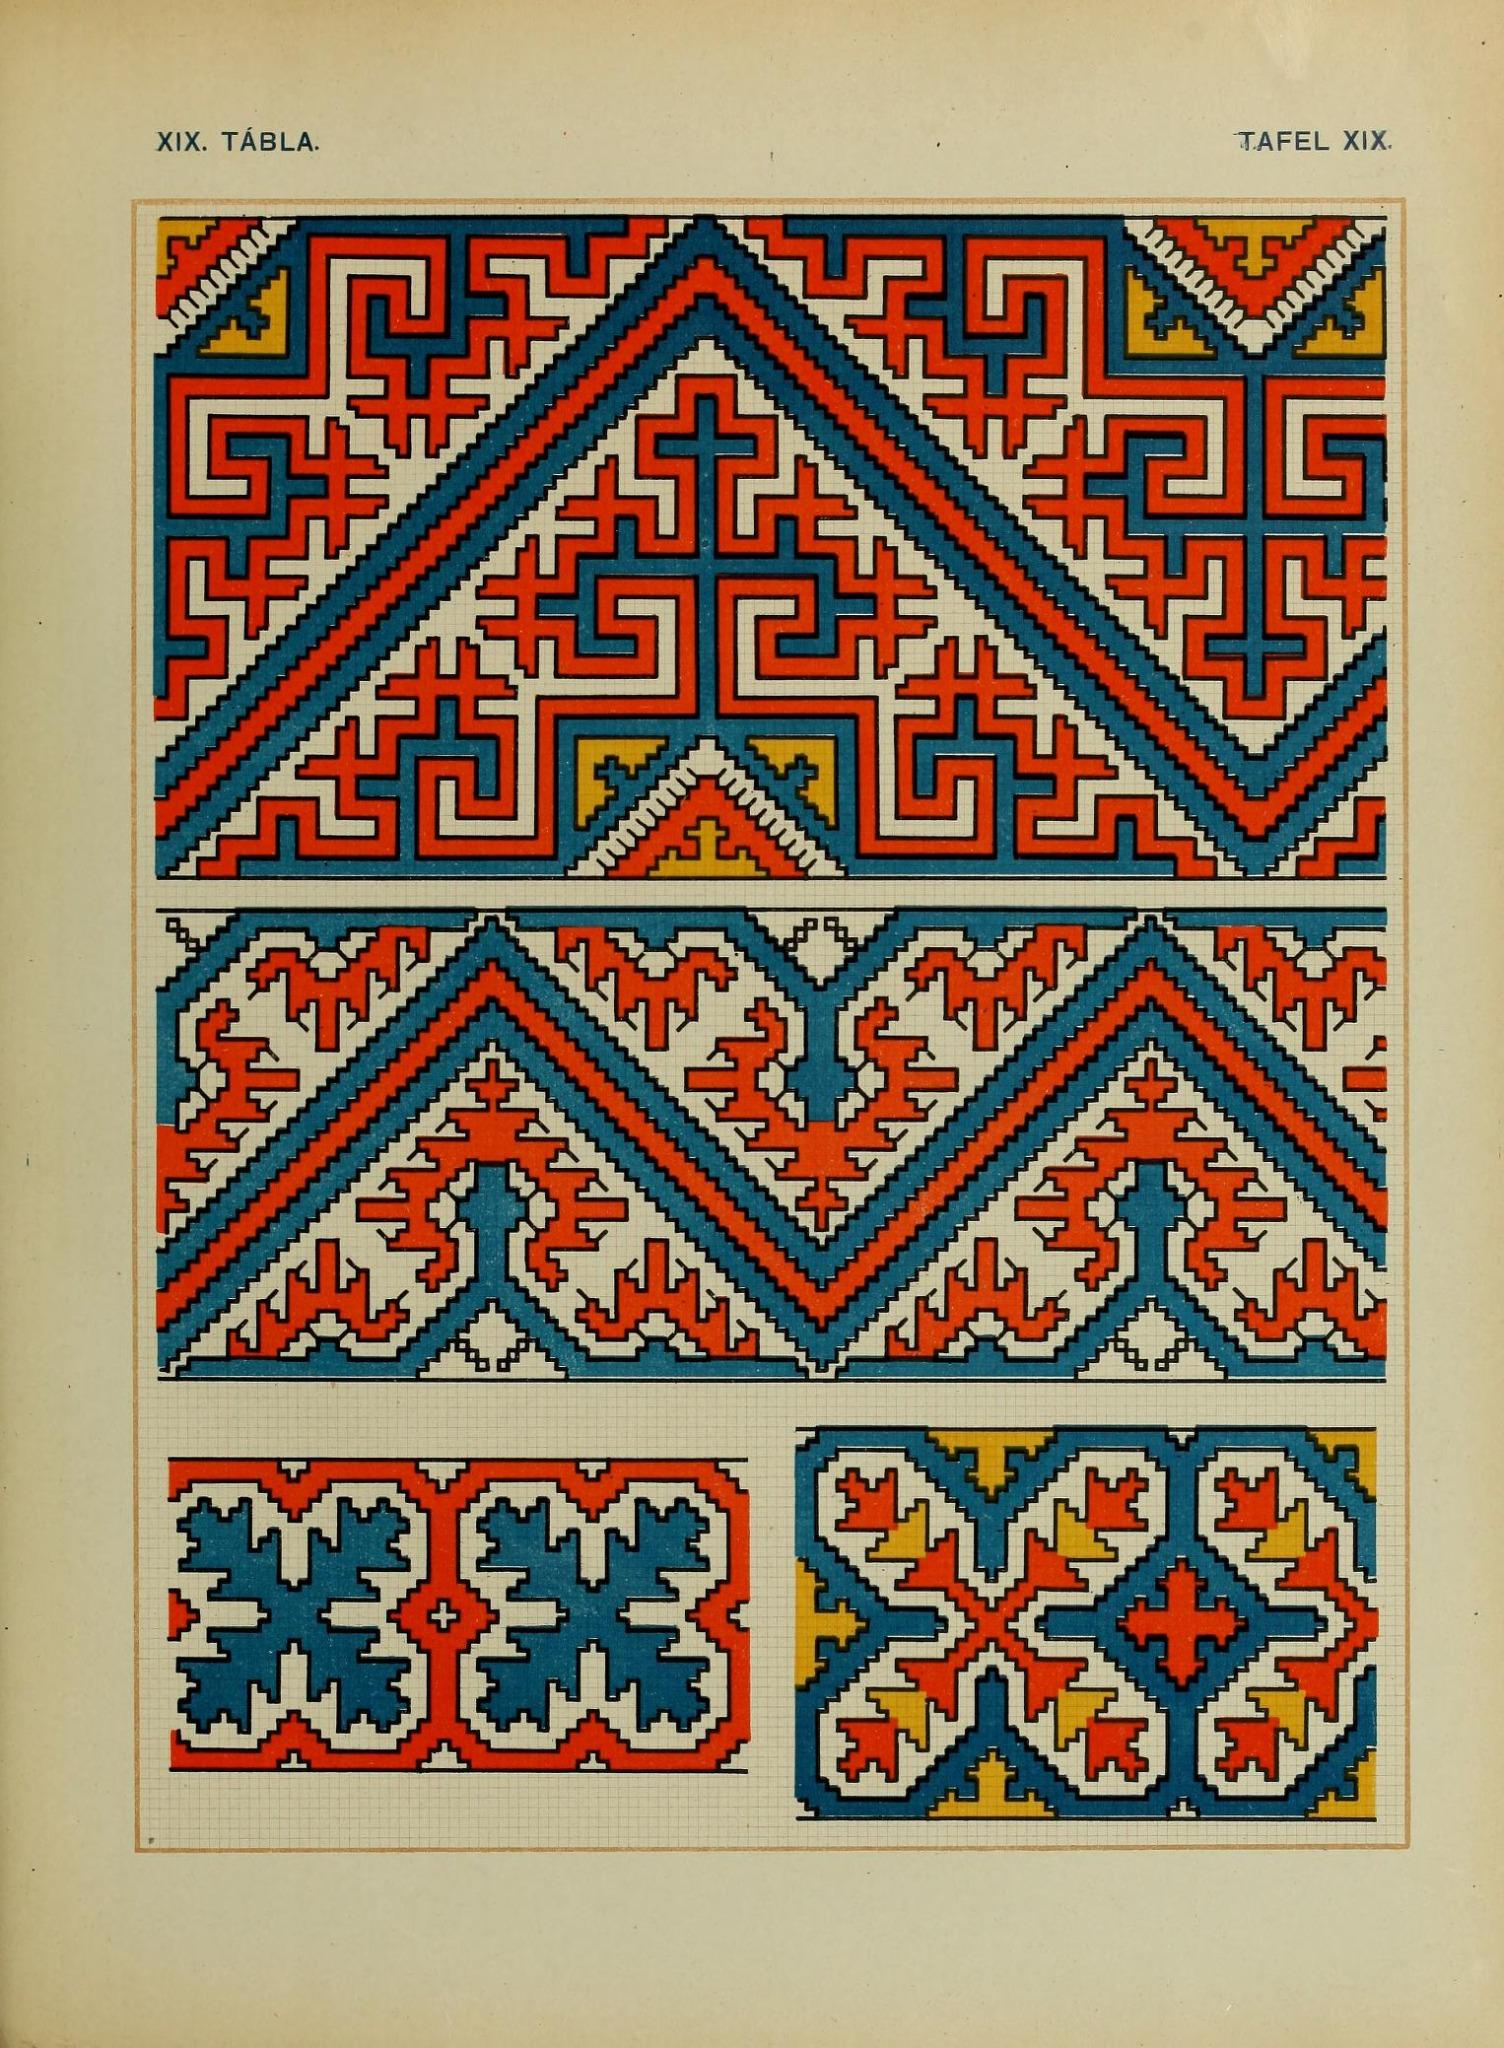 Embroidery Books Patterns, Hungarian Embroidery Patterns